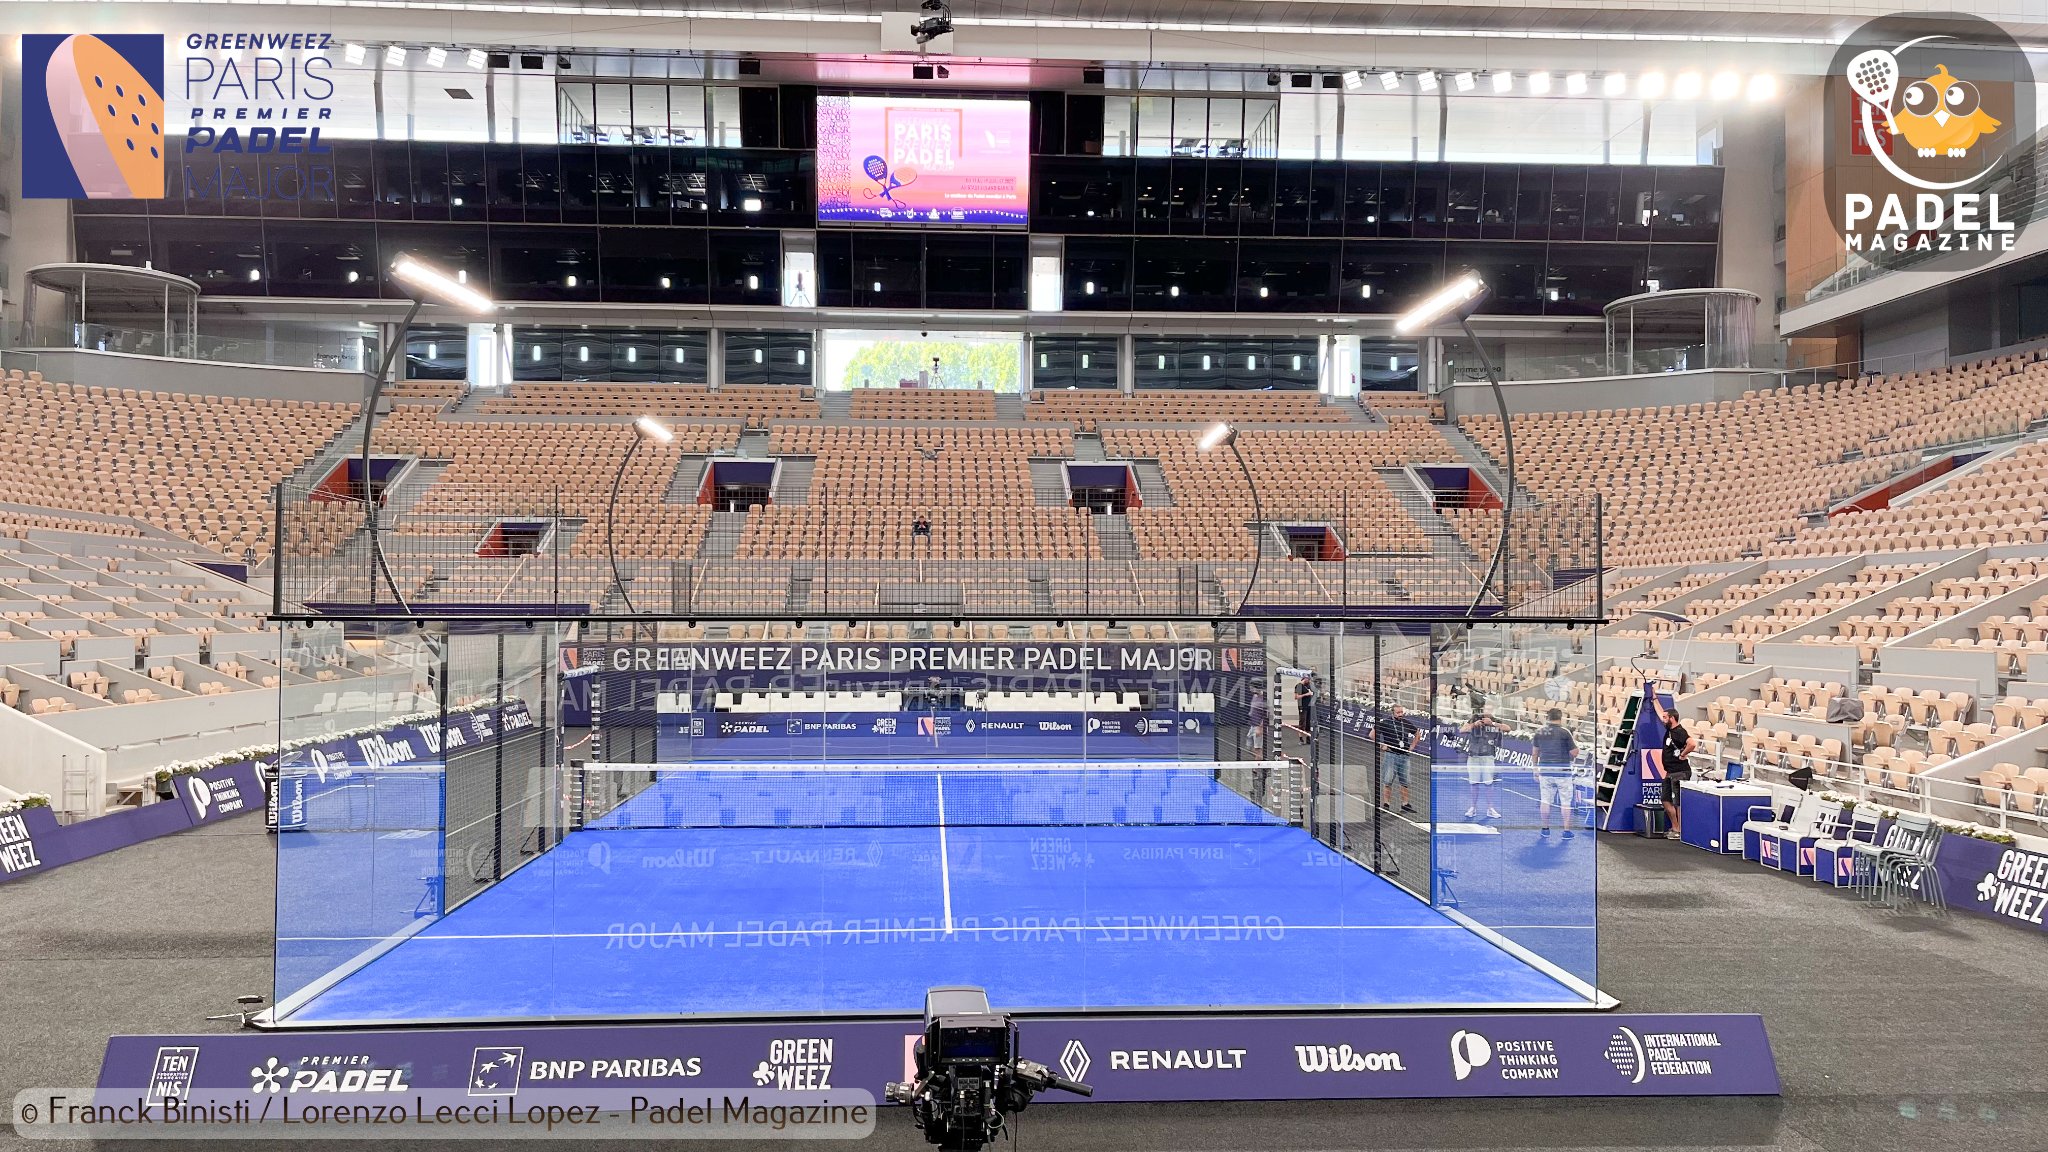 Where to watch the Greenweez Paris Premier Padel Major 2022?